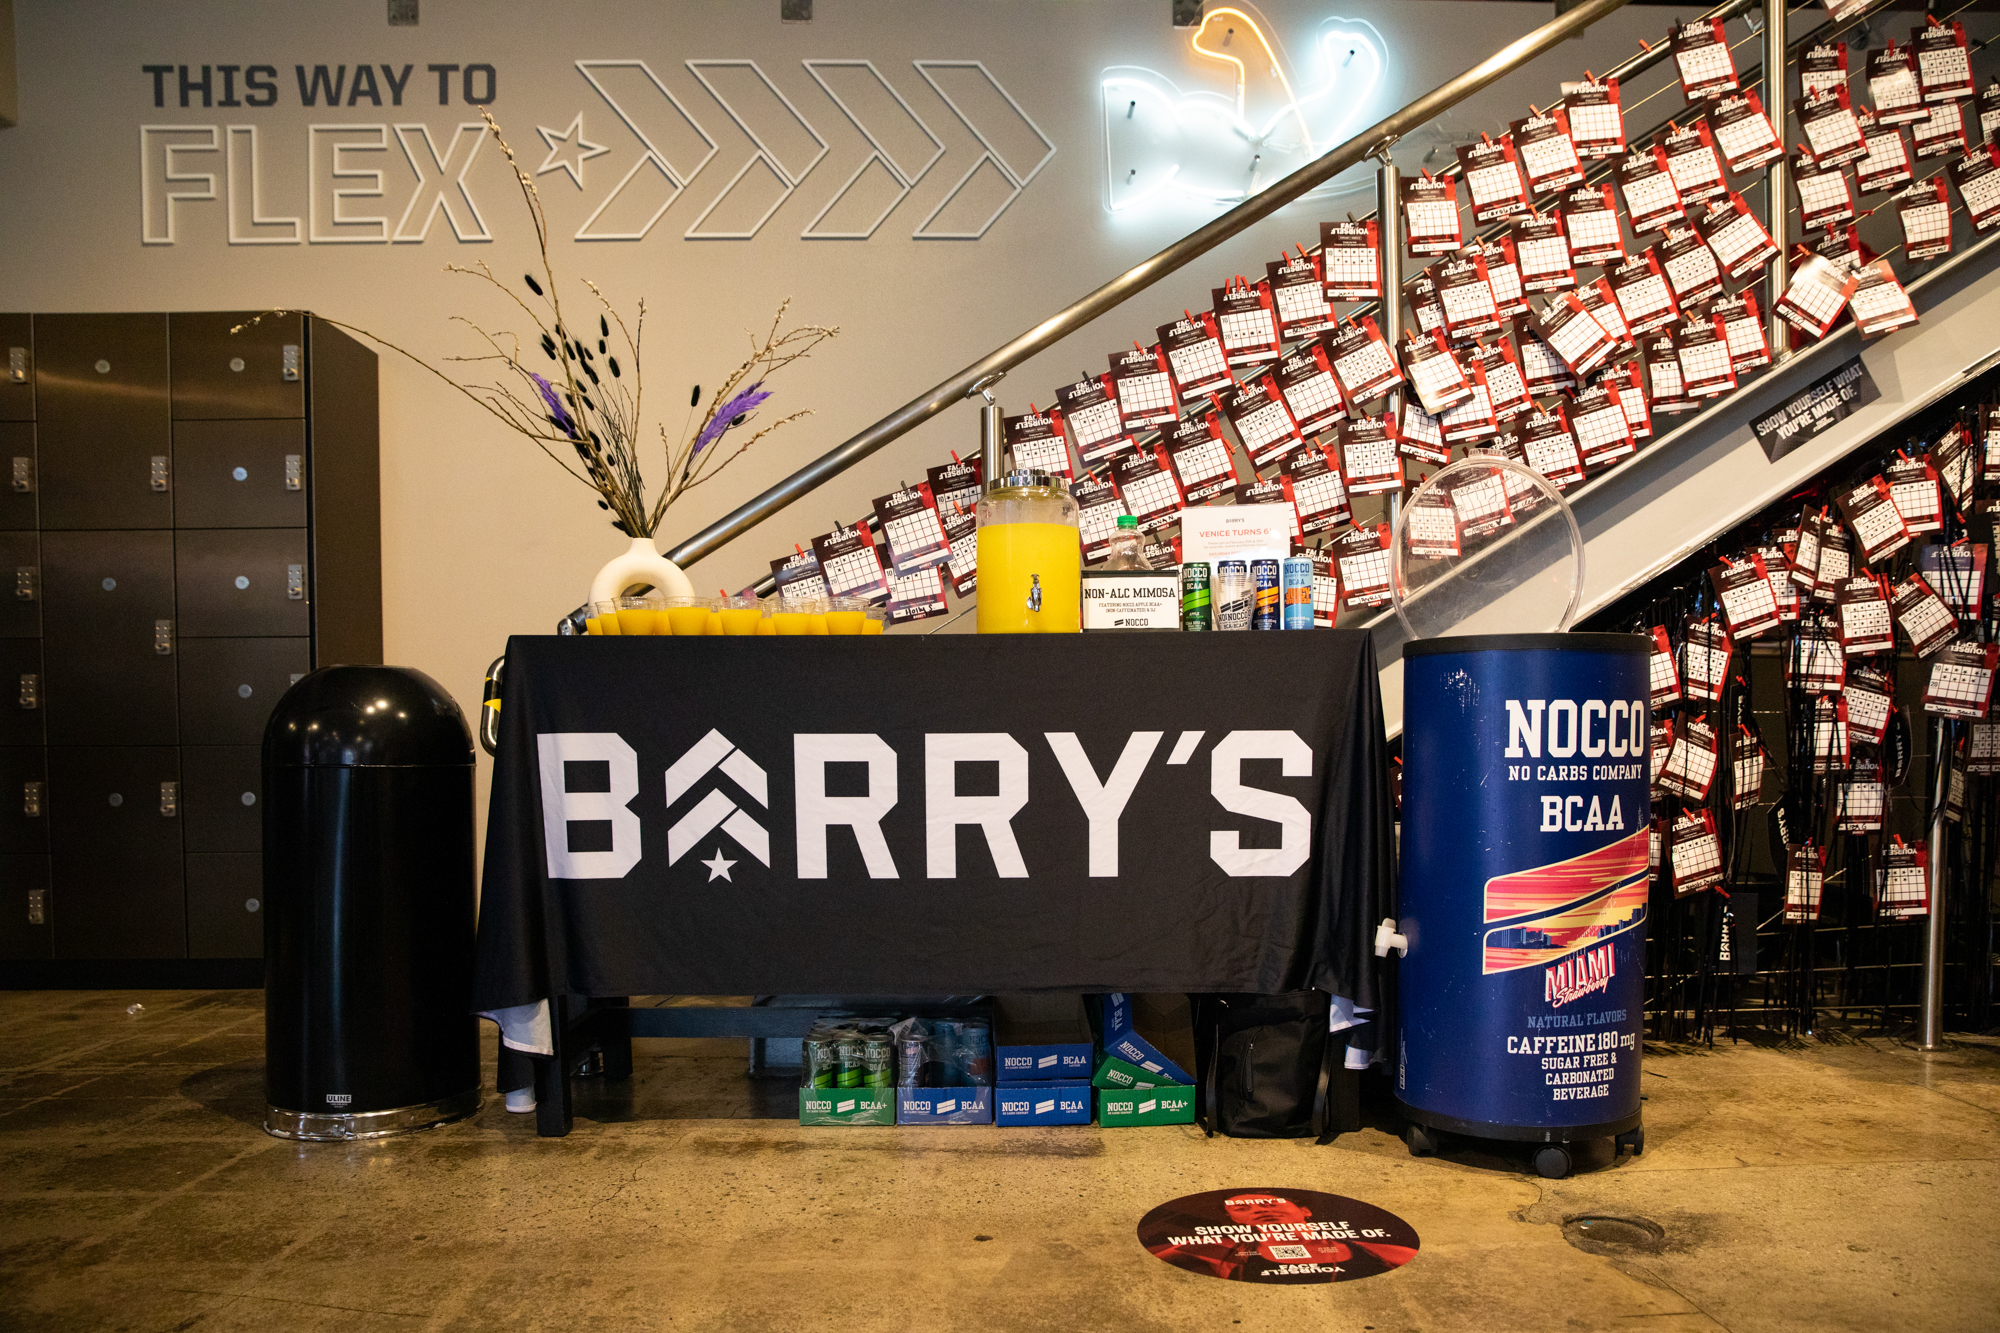 Barry's Bootcamp Nocco partnership